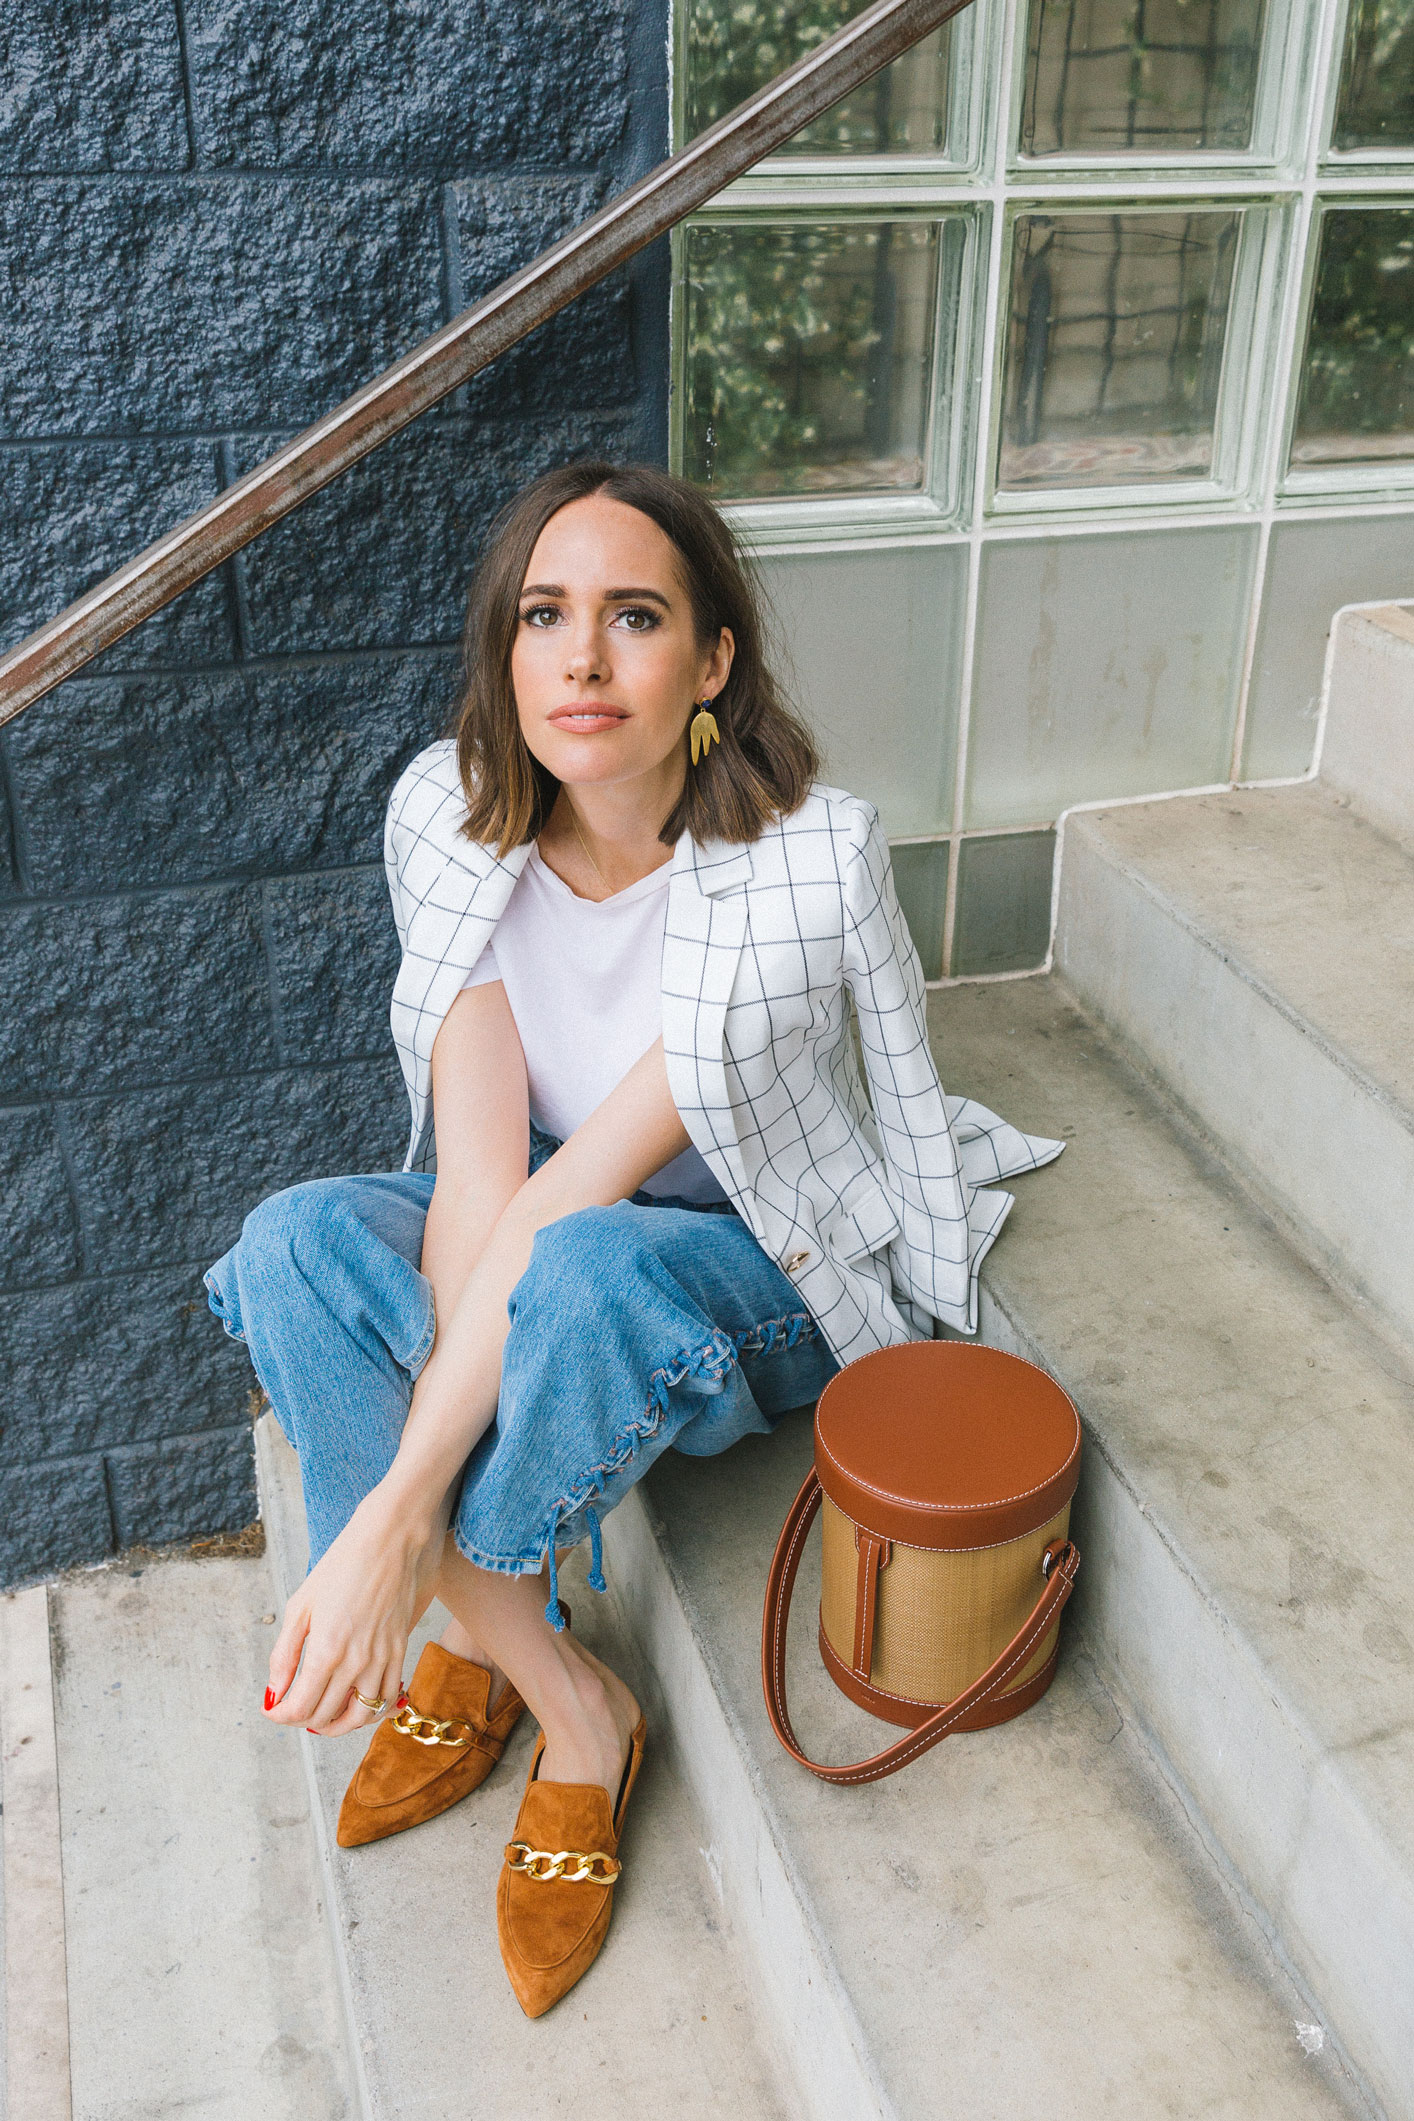 Louise Roe Tips On How To Get Confidence Back After Having A Baby Wearing Chriselle Lim Blazer and Jeans